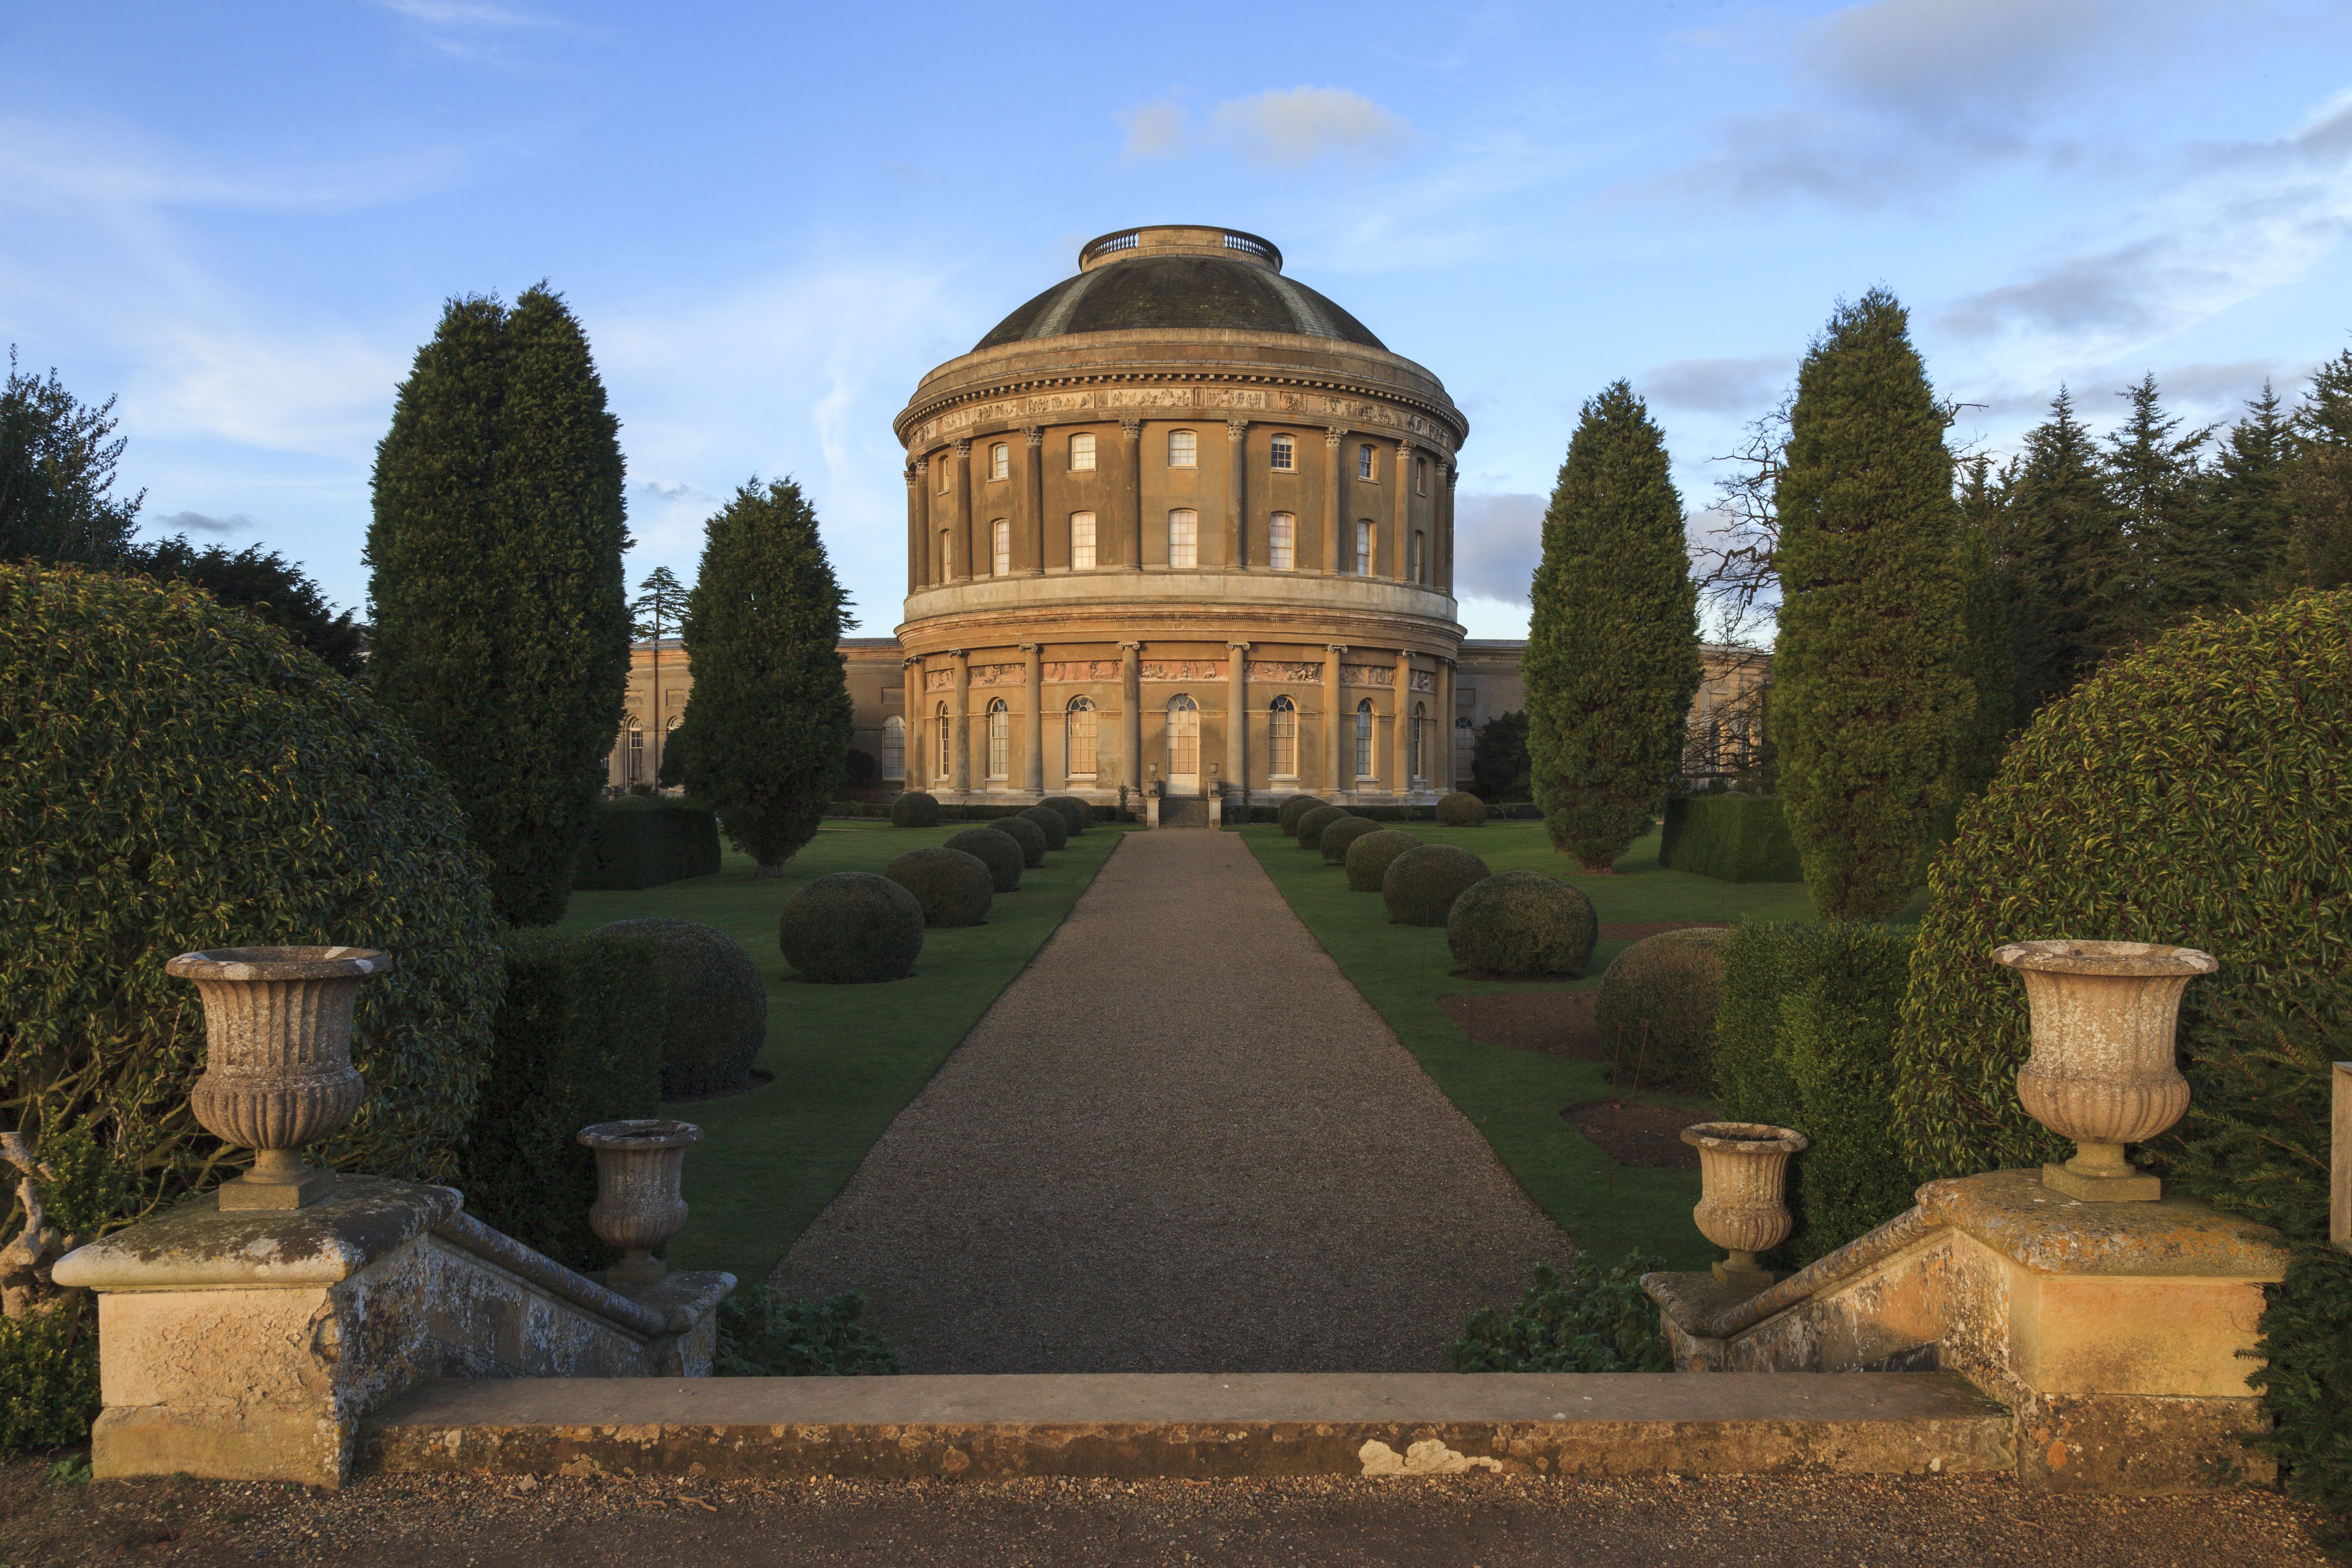 Ickworth Palace and Gardens